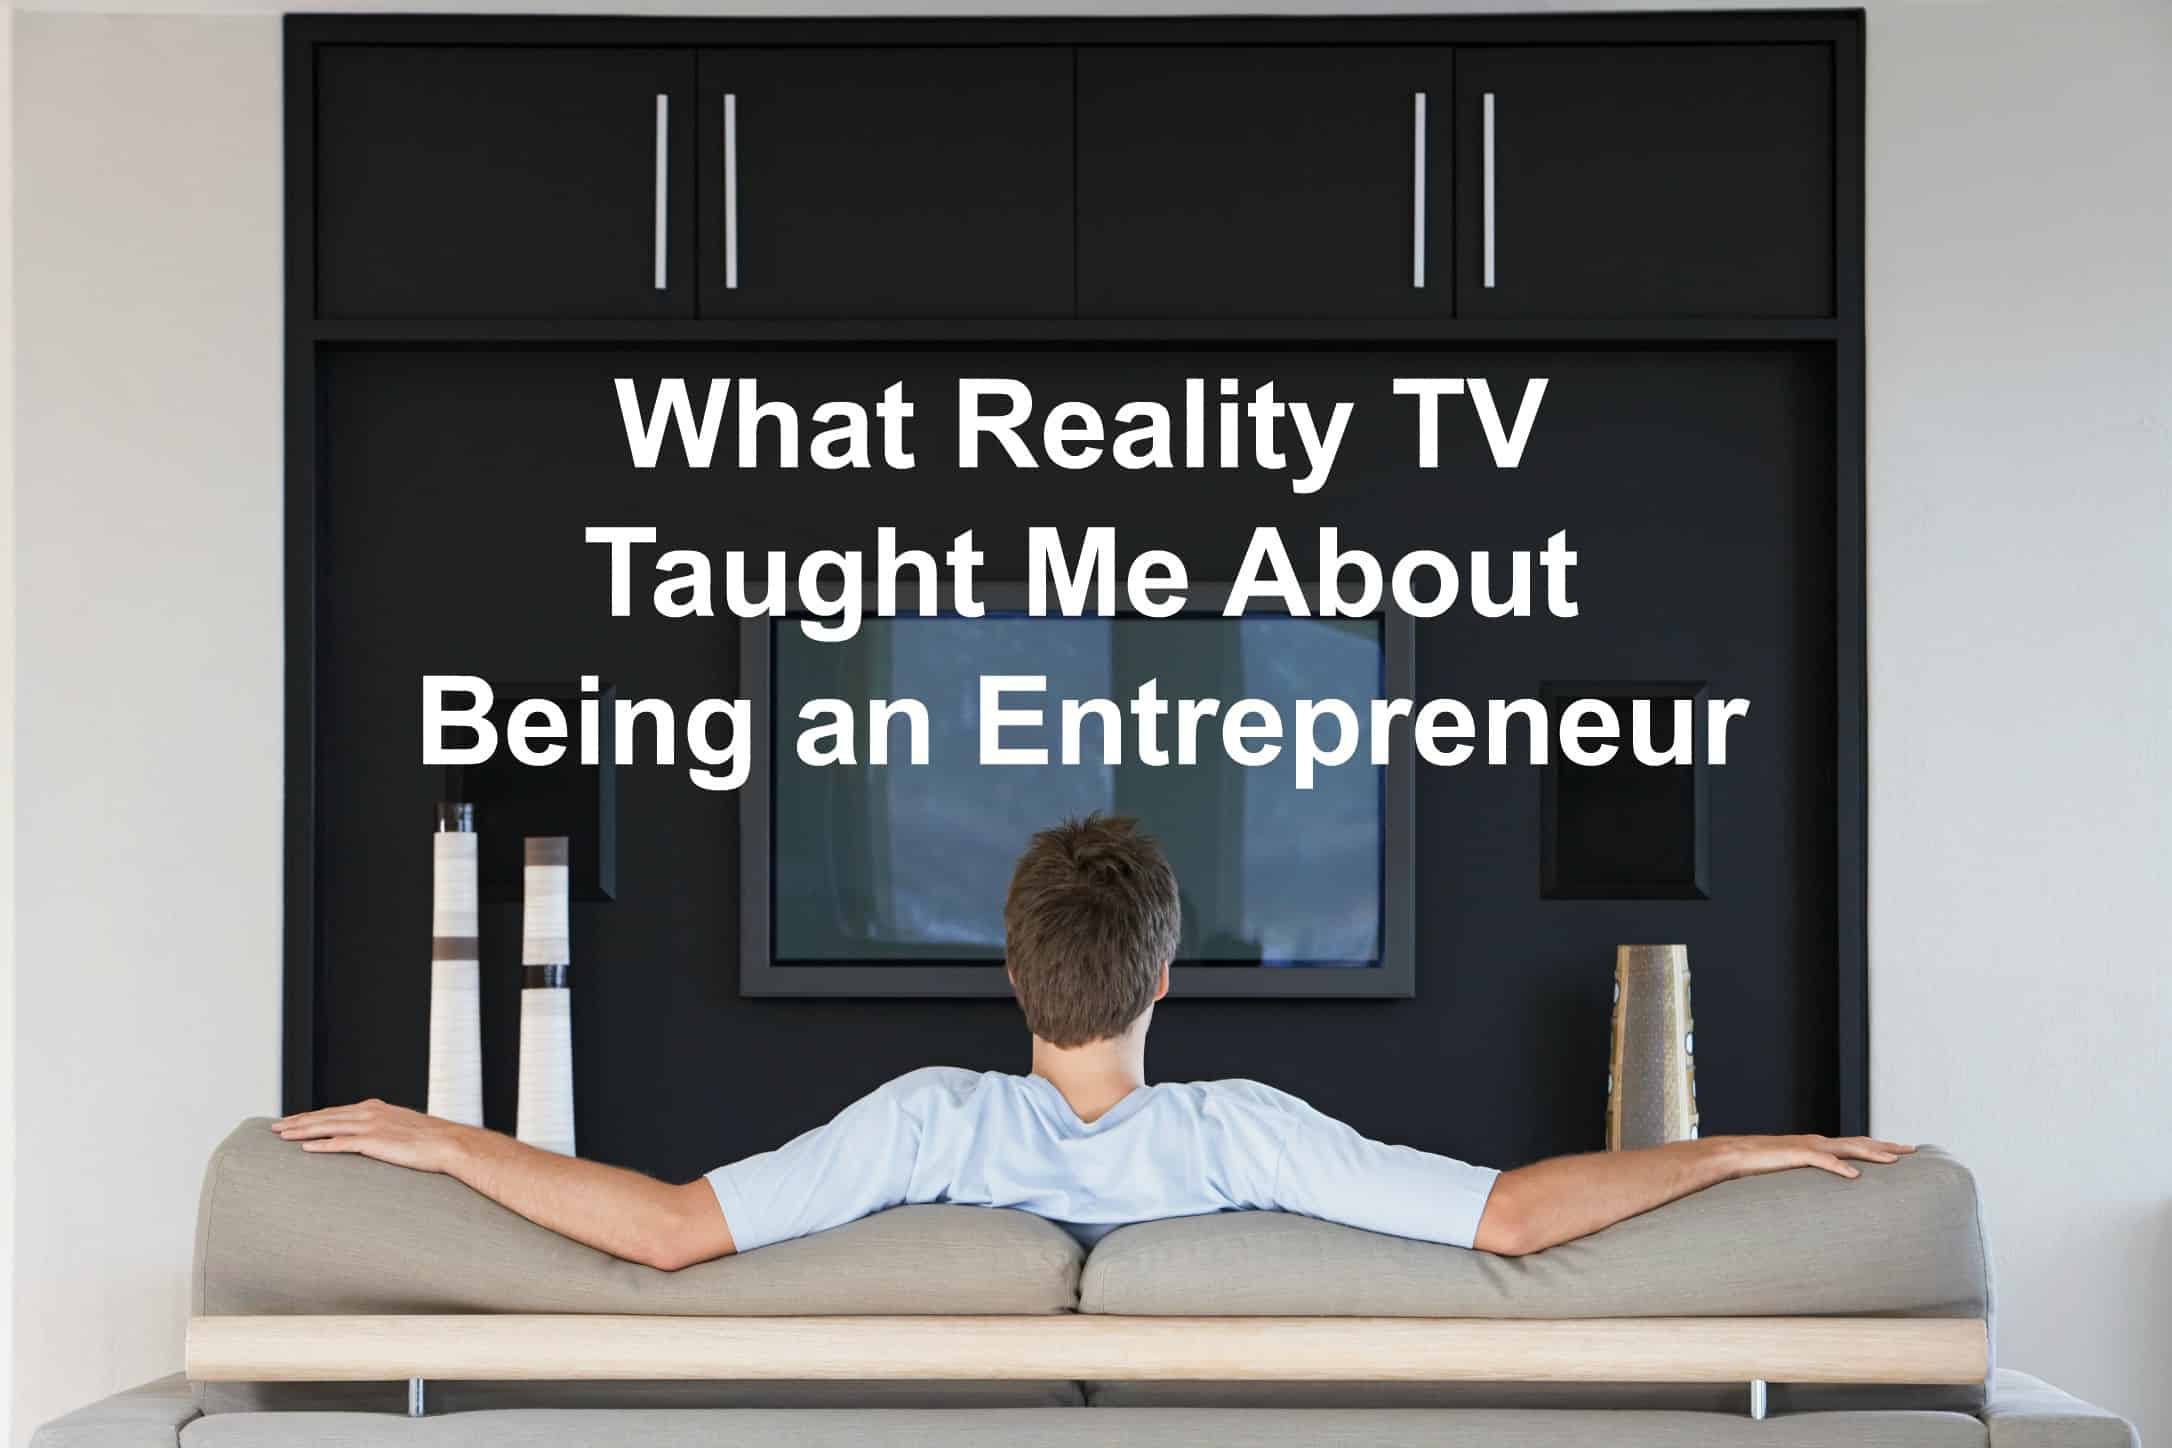 TV and entrepreneurship can go together